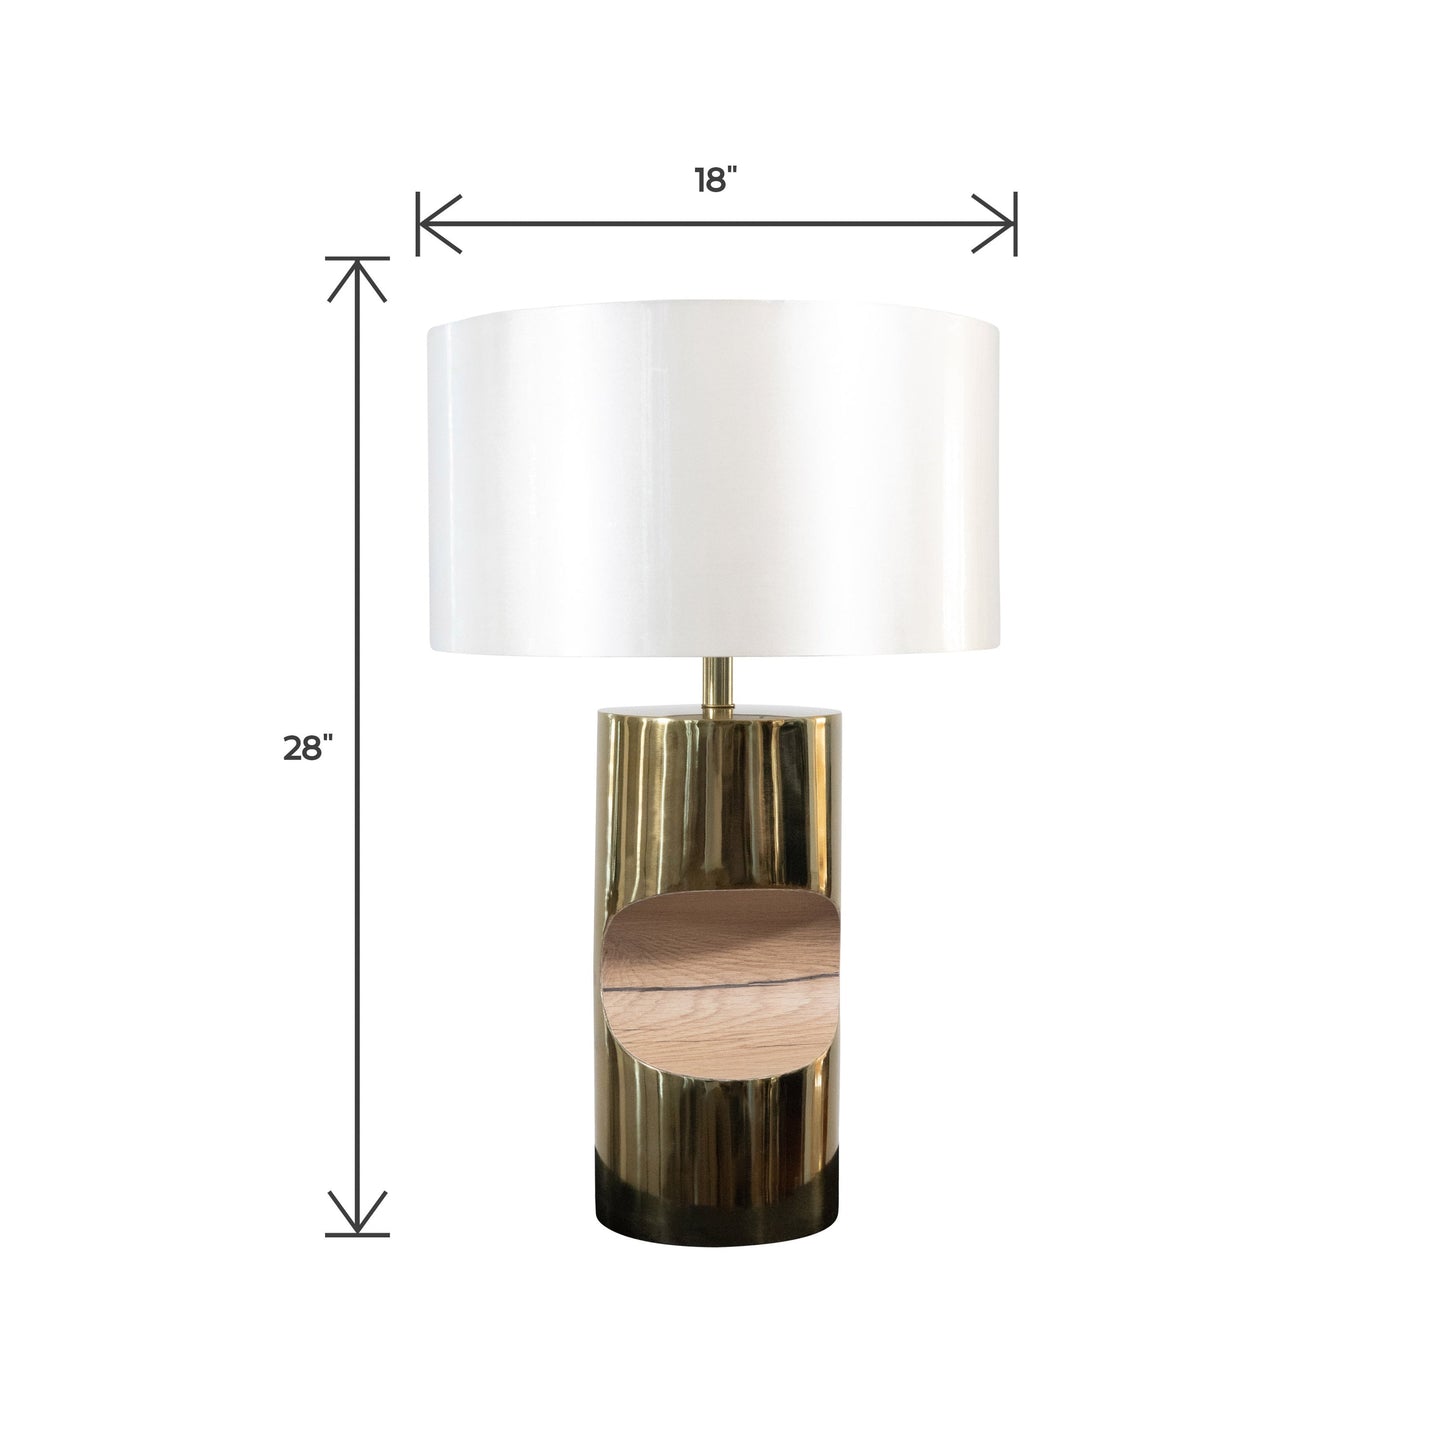 Modern Stainless Steel and Wooden Table Lamp